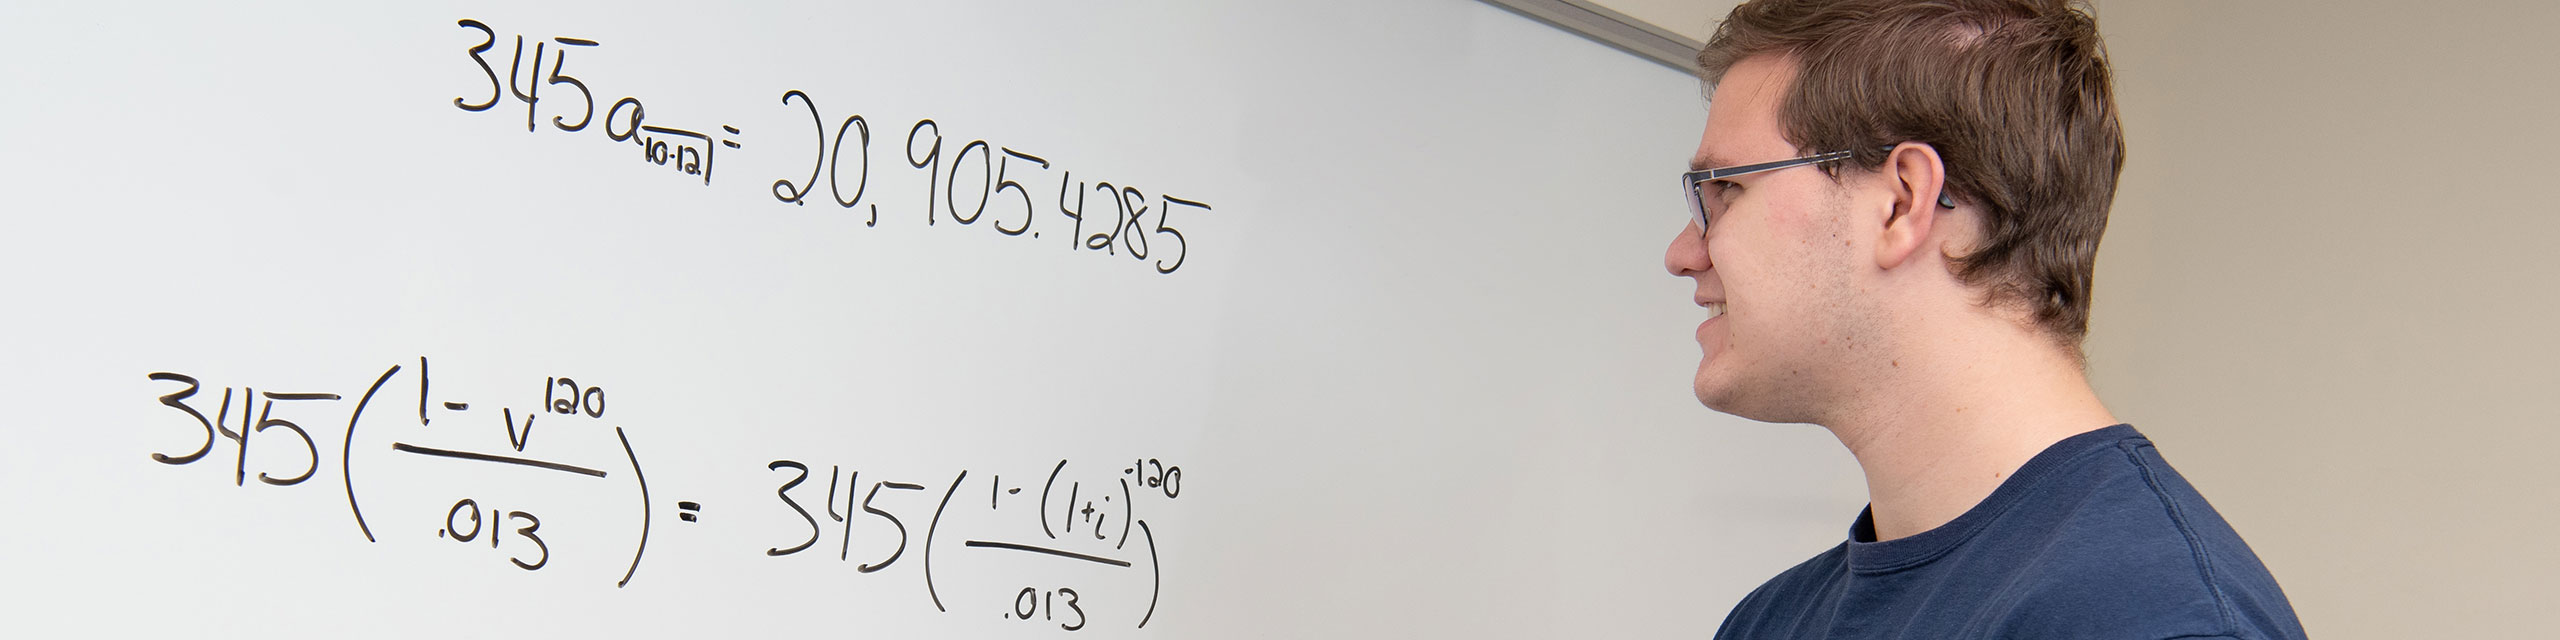 Student looking to a white board with some mathematical expressions written on it.